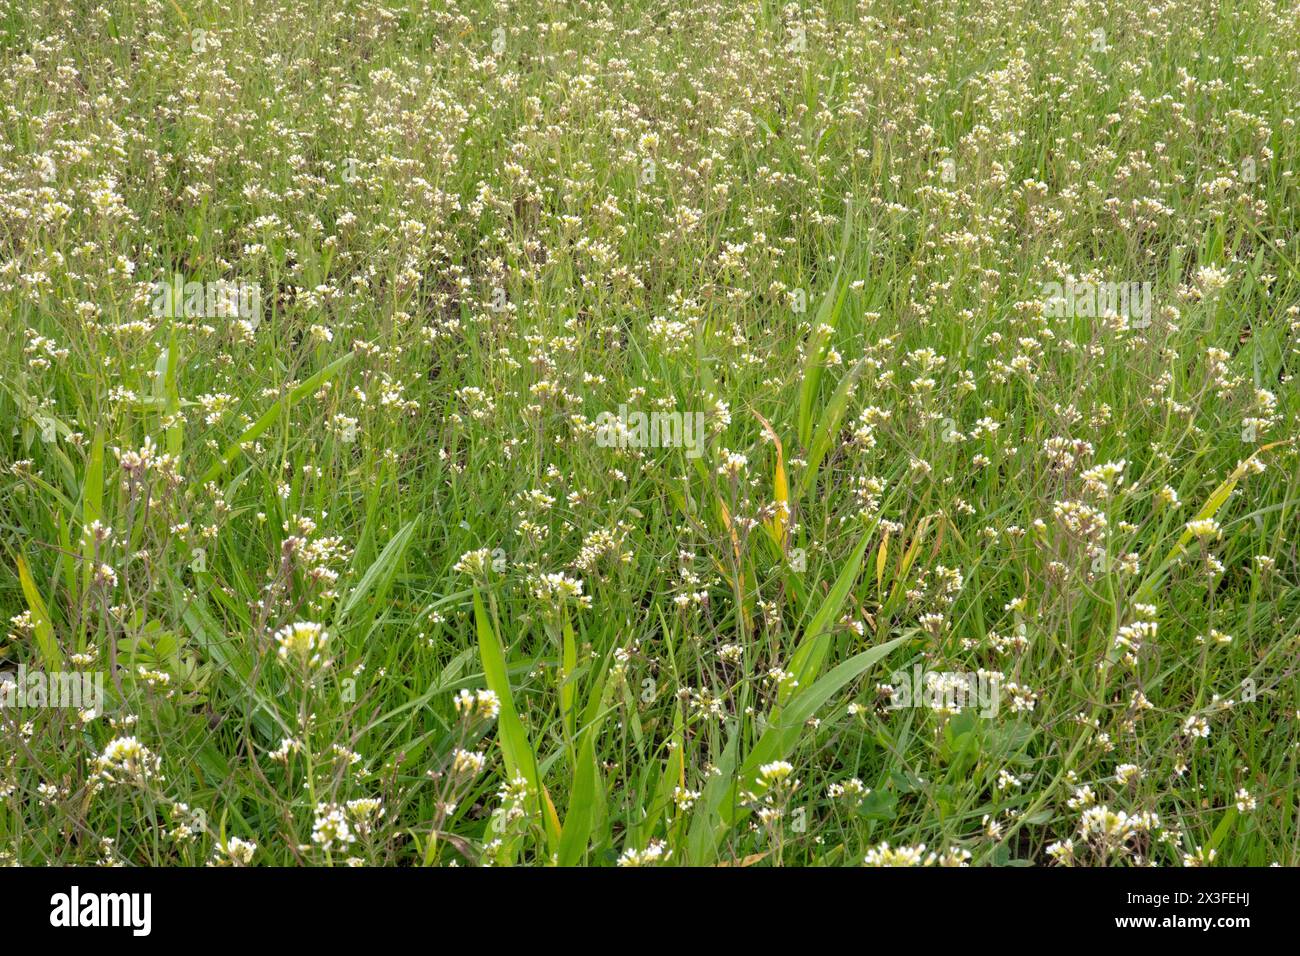 Large amount of Thale cress blooming in a meadow Stock Photo